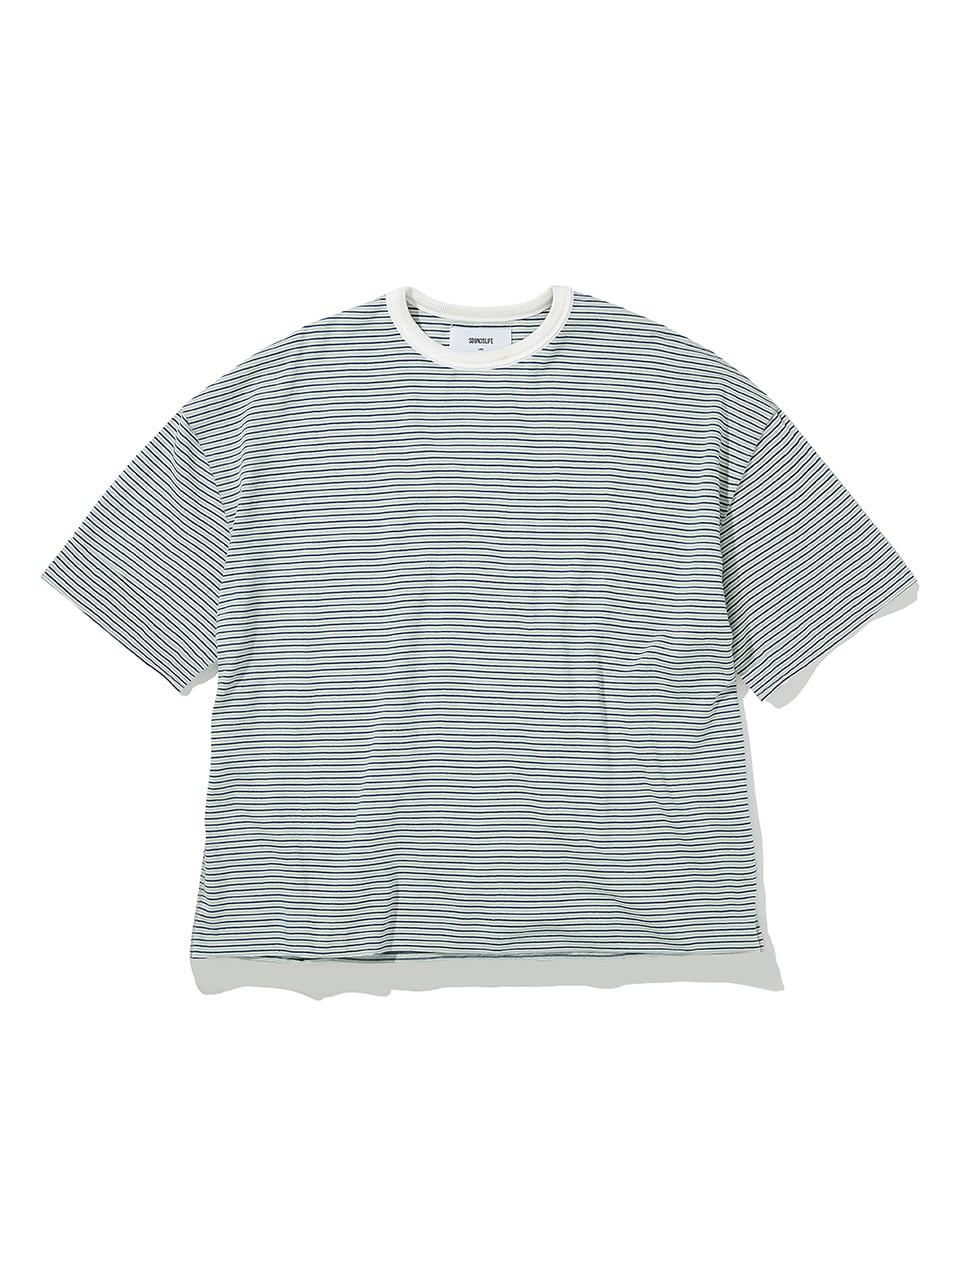 SOUNDSLIFE - Vacation Striped T-Shirt Blue